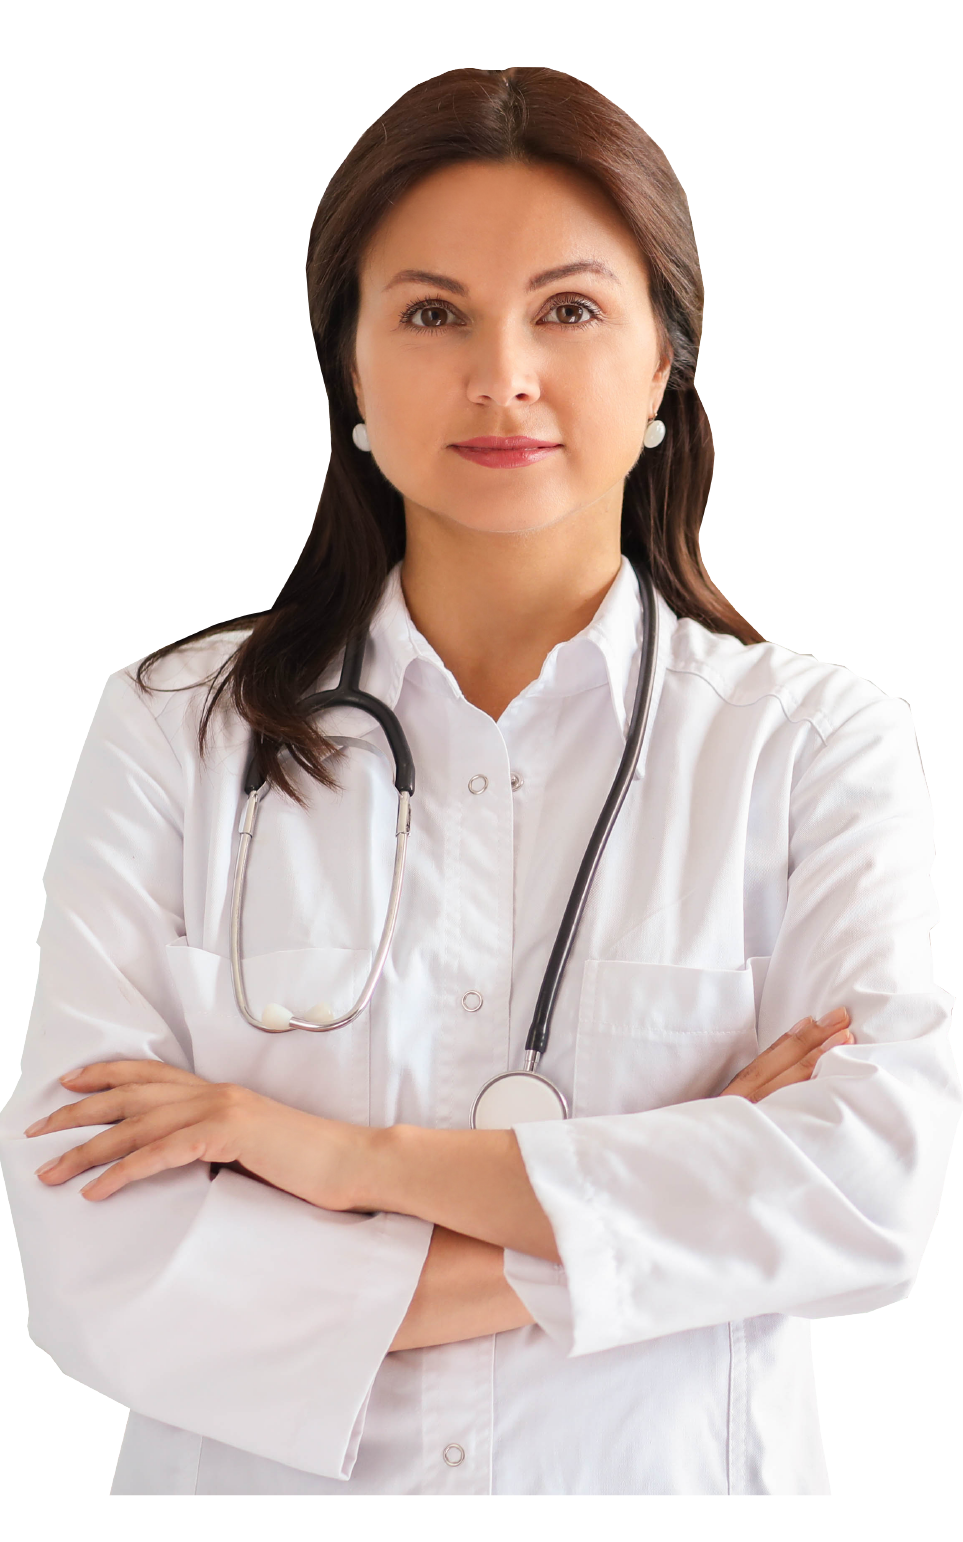 lady doctor with stethoscope